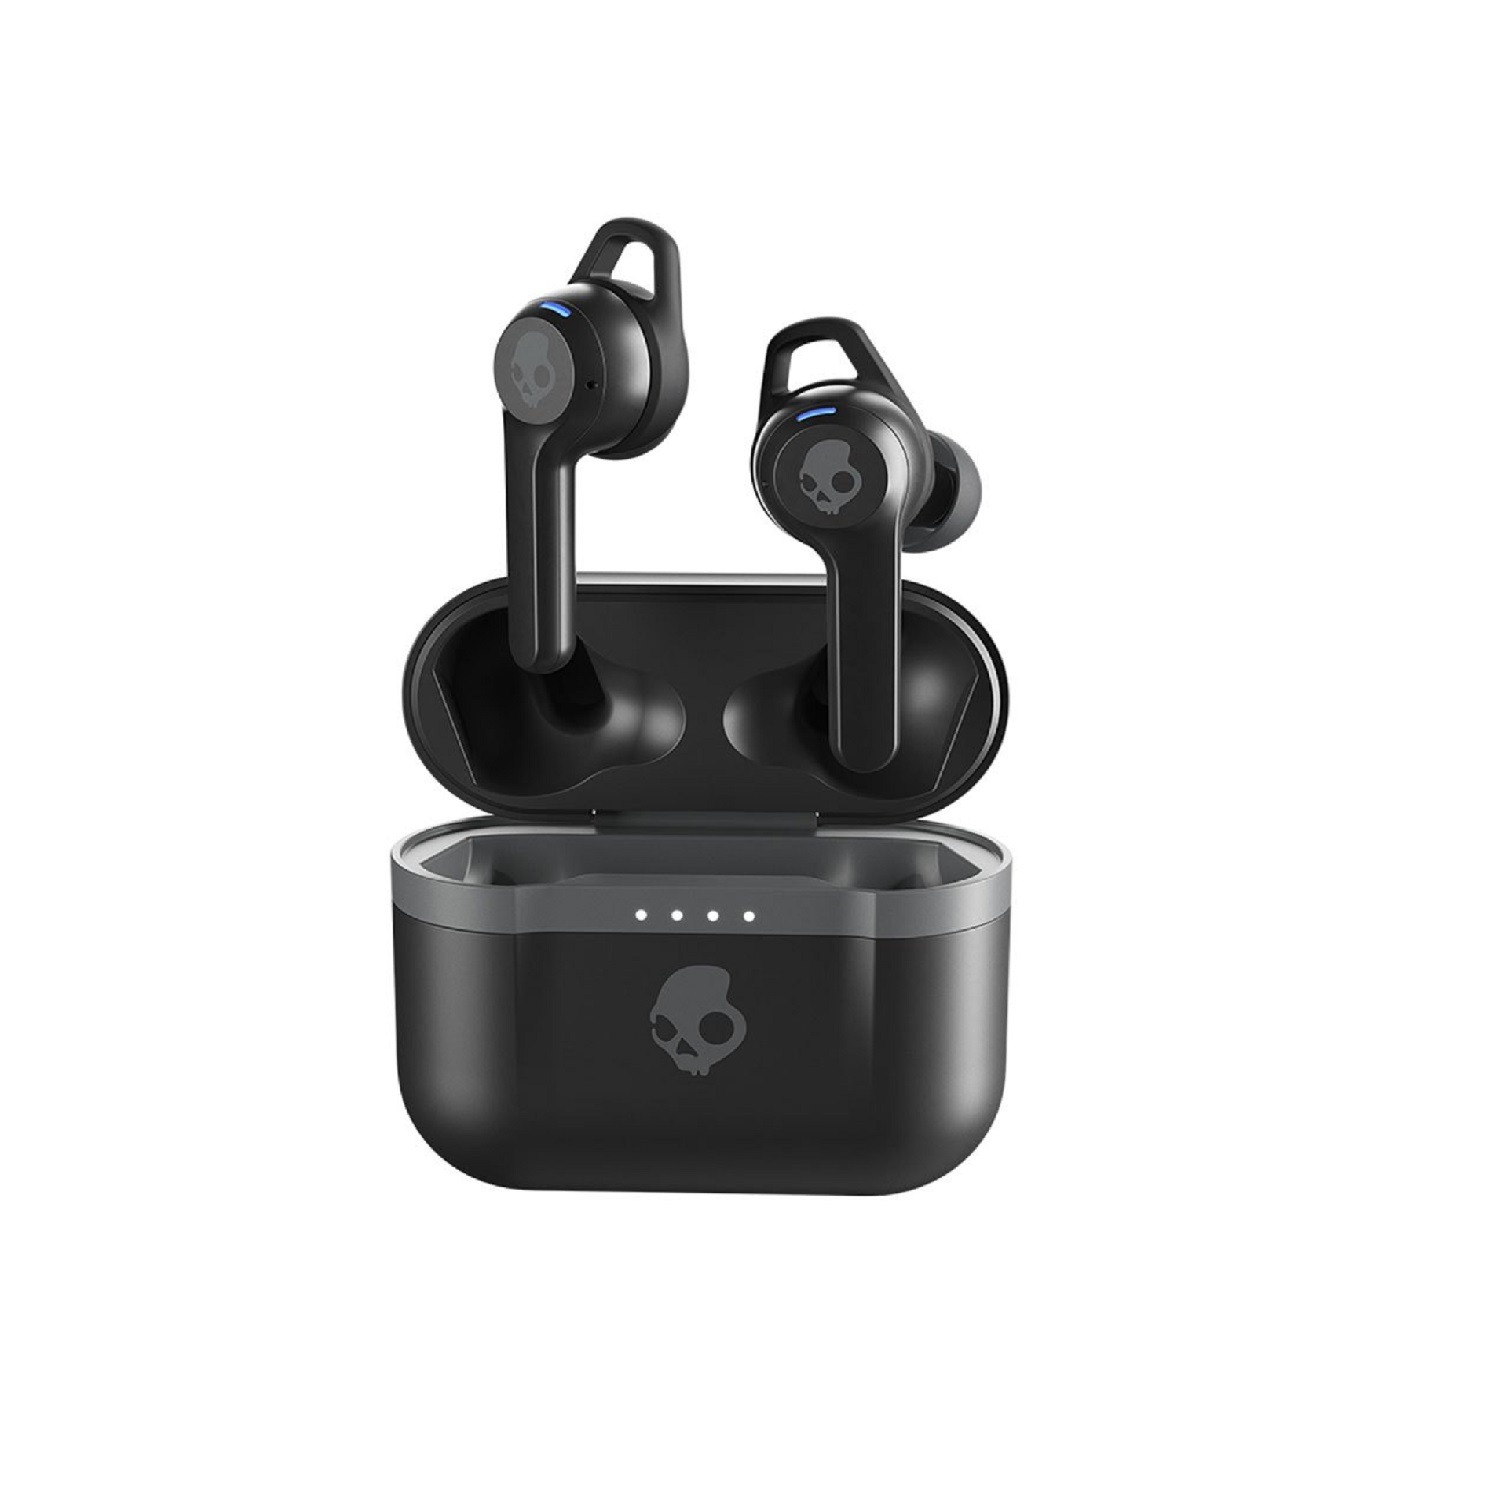 Pairing Skullcandy Indy Anc Wireless Earbuds